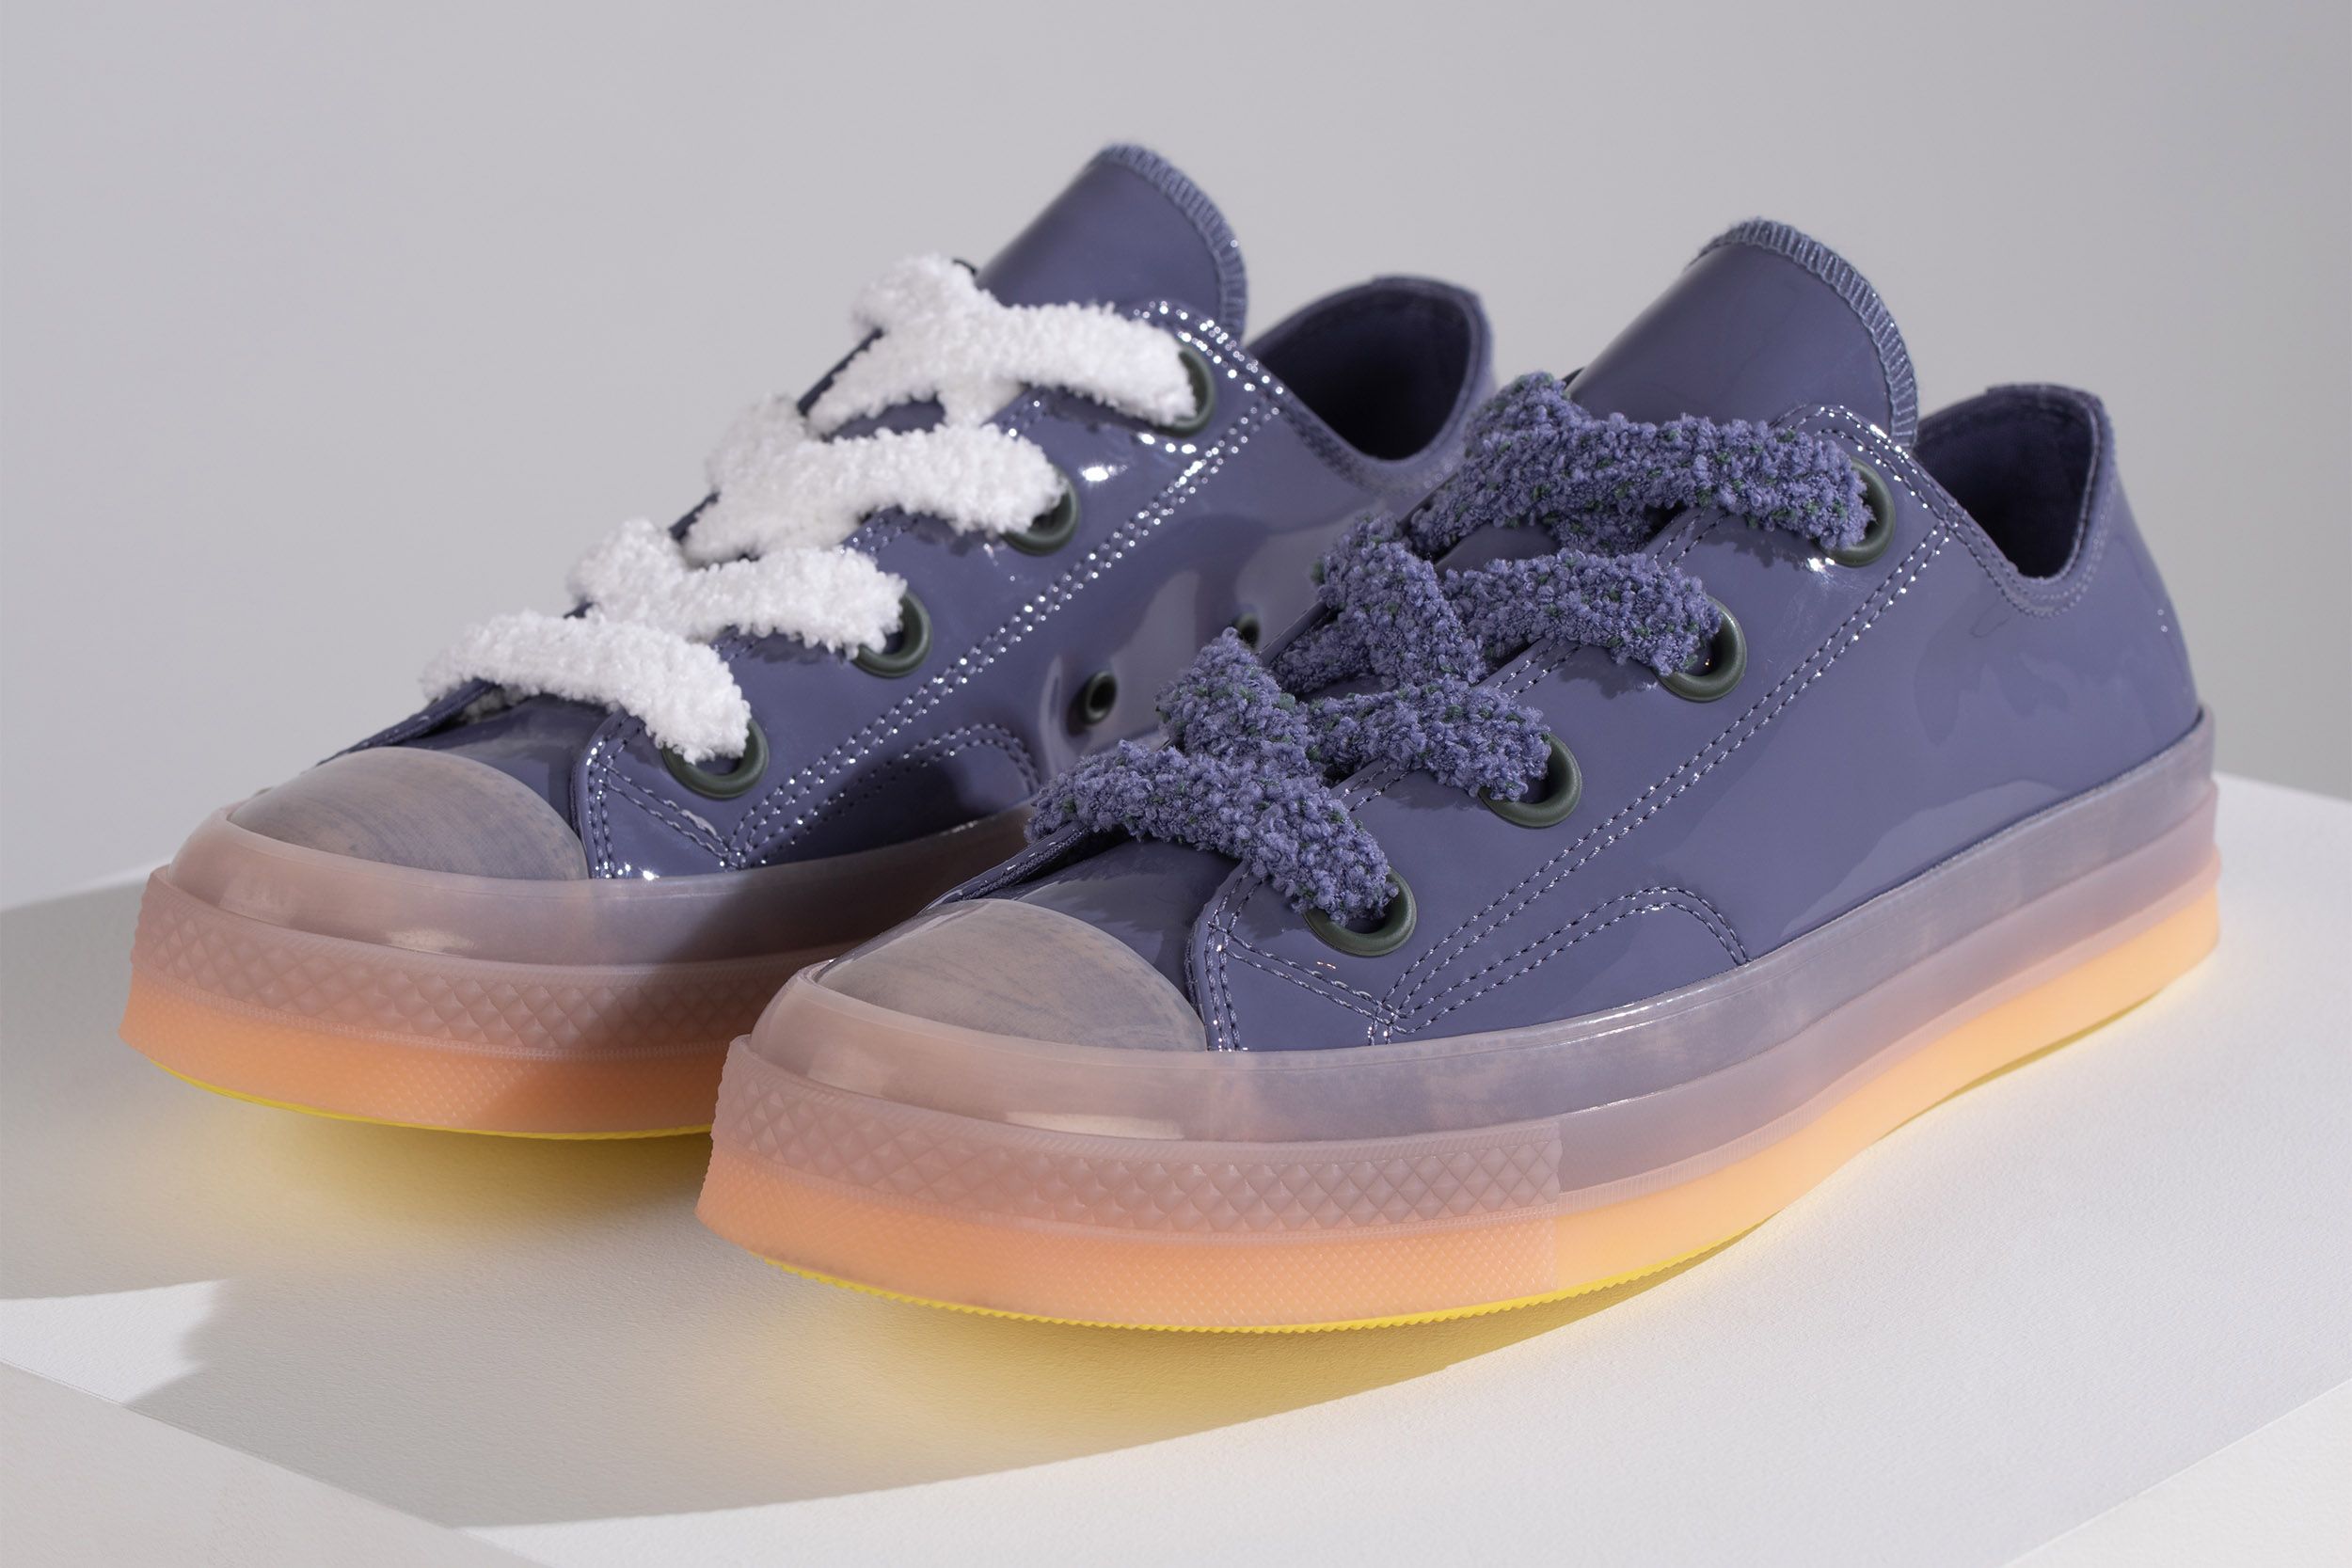 JW Anderson x Converse's Latest Is Damn Fun and Stylish